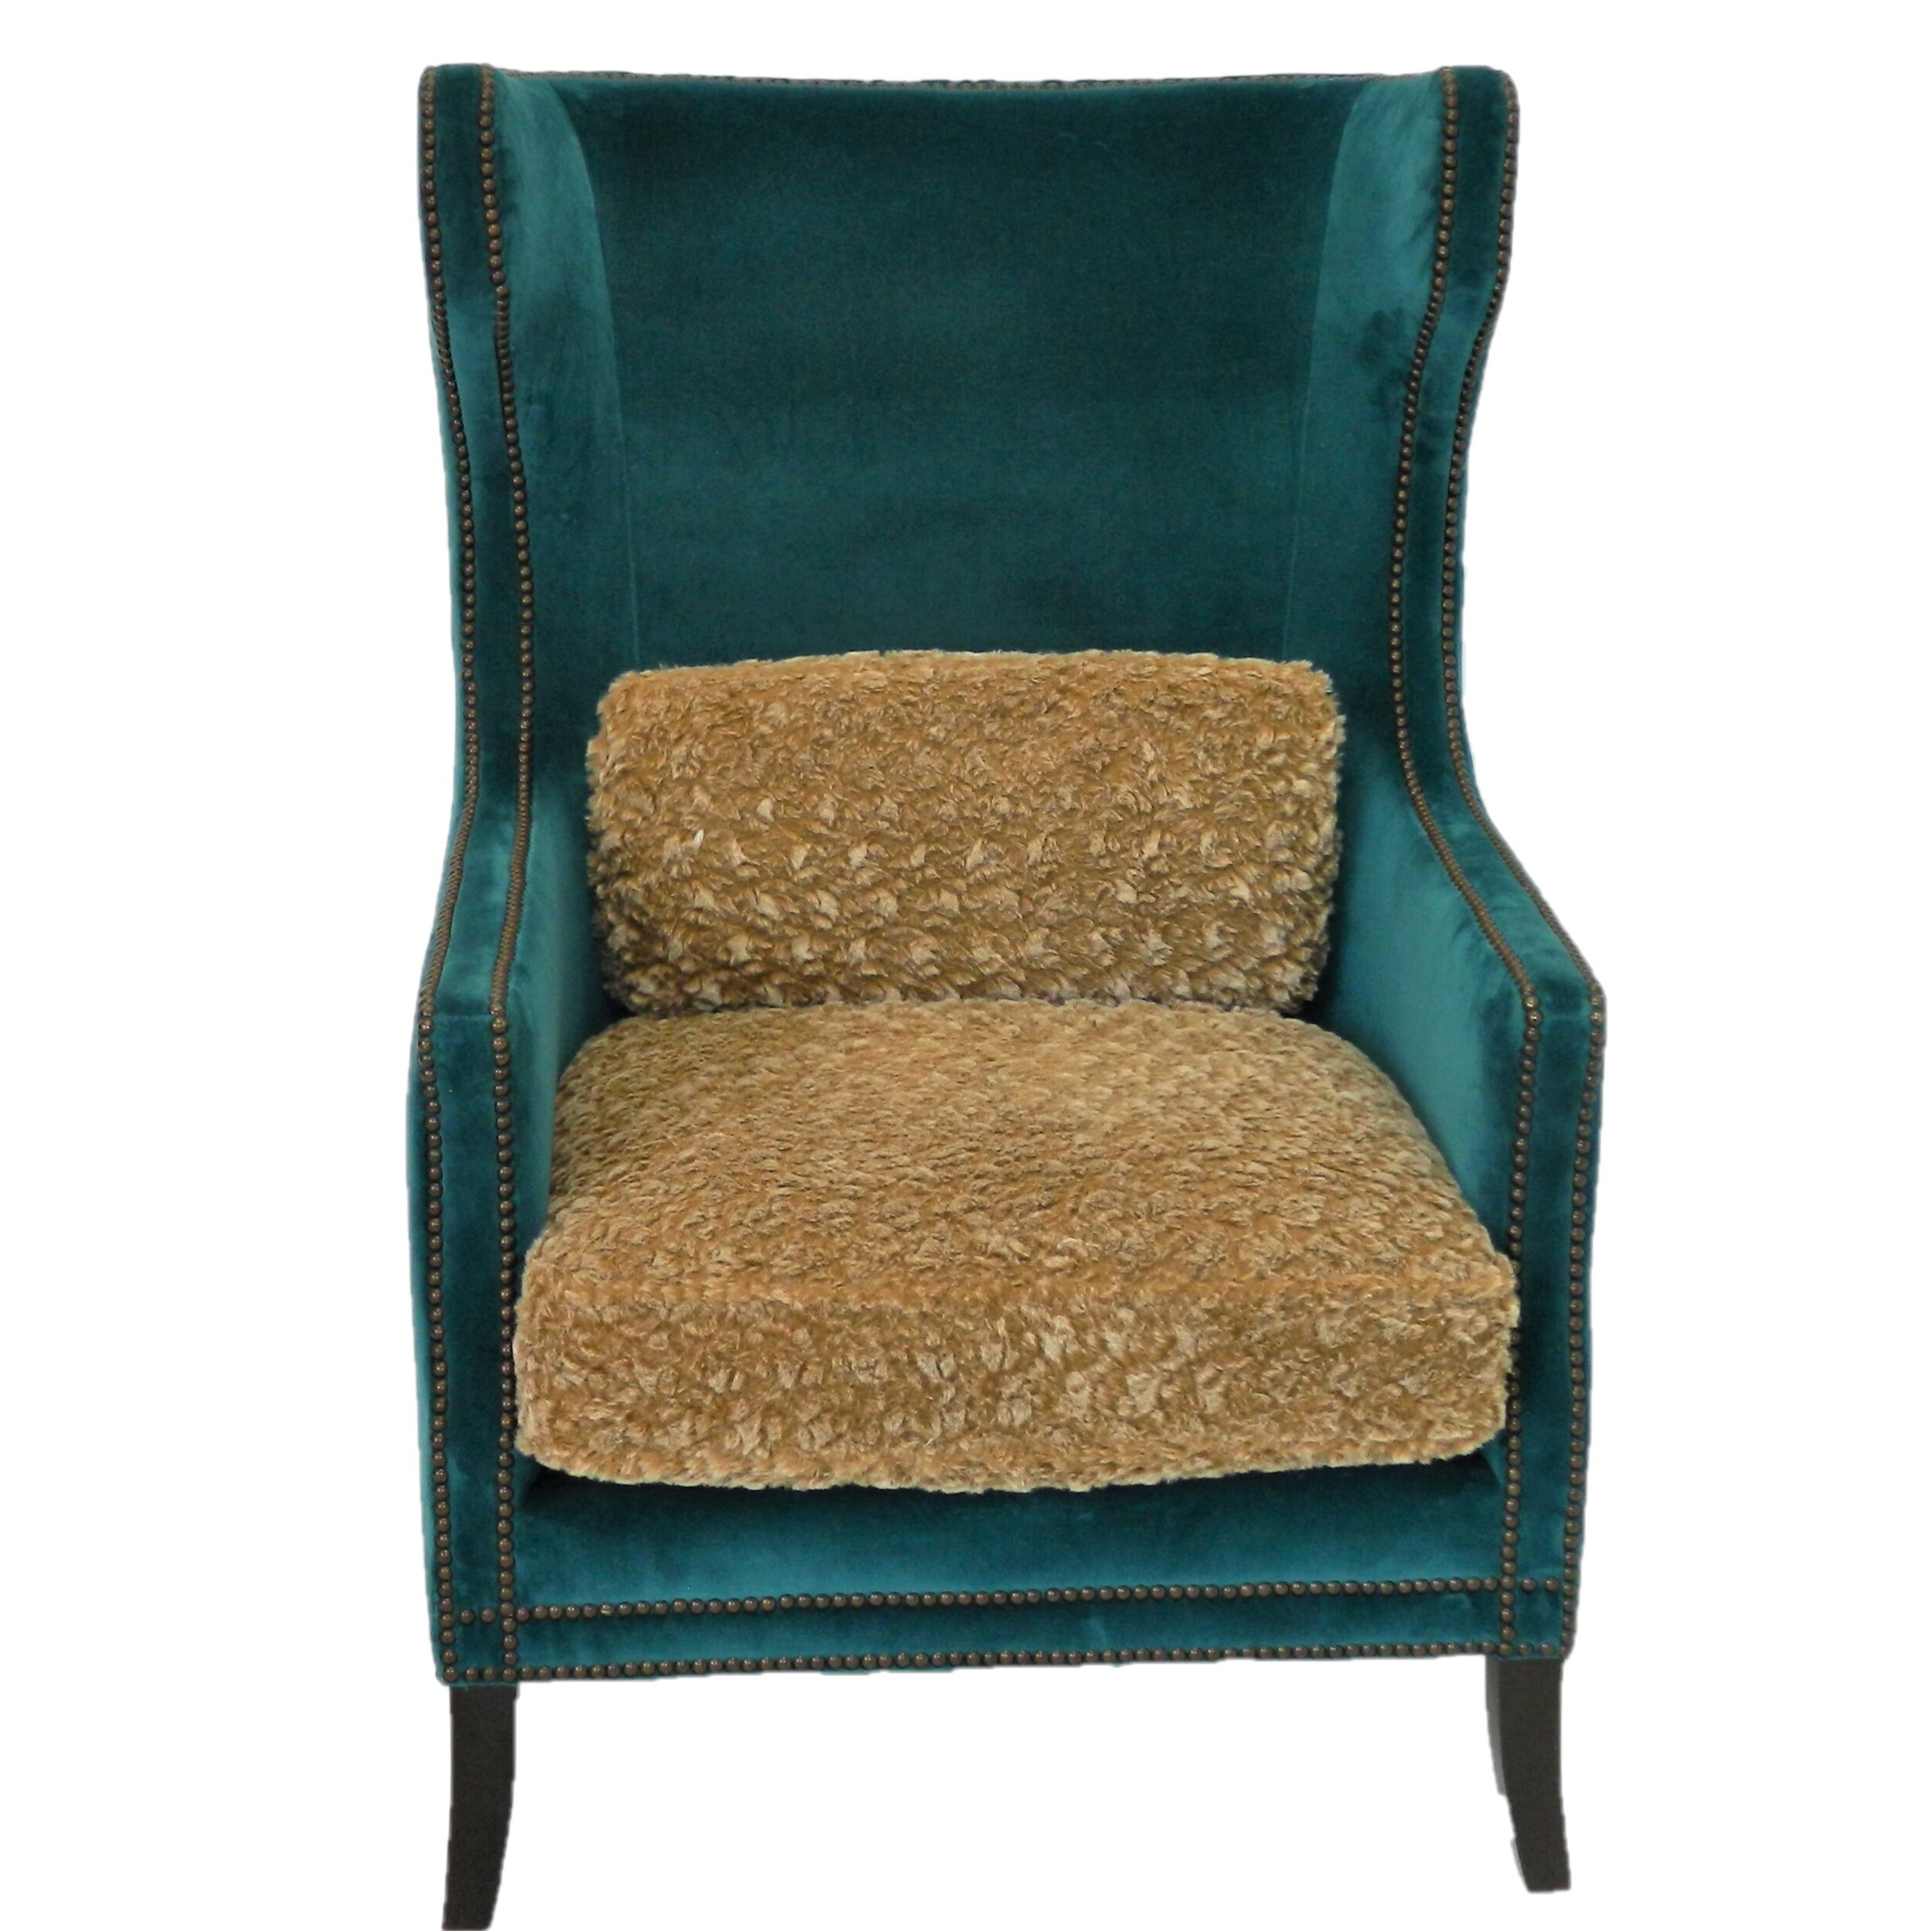 Pair Kingston Teal Velvet Wingback Chairs With Nailhead Trim By